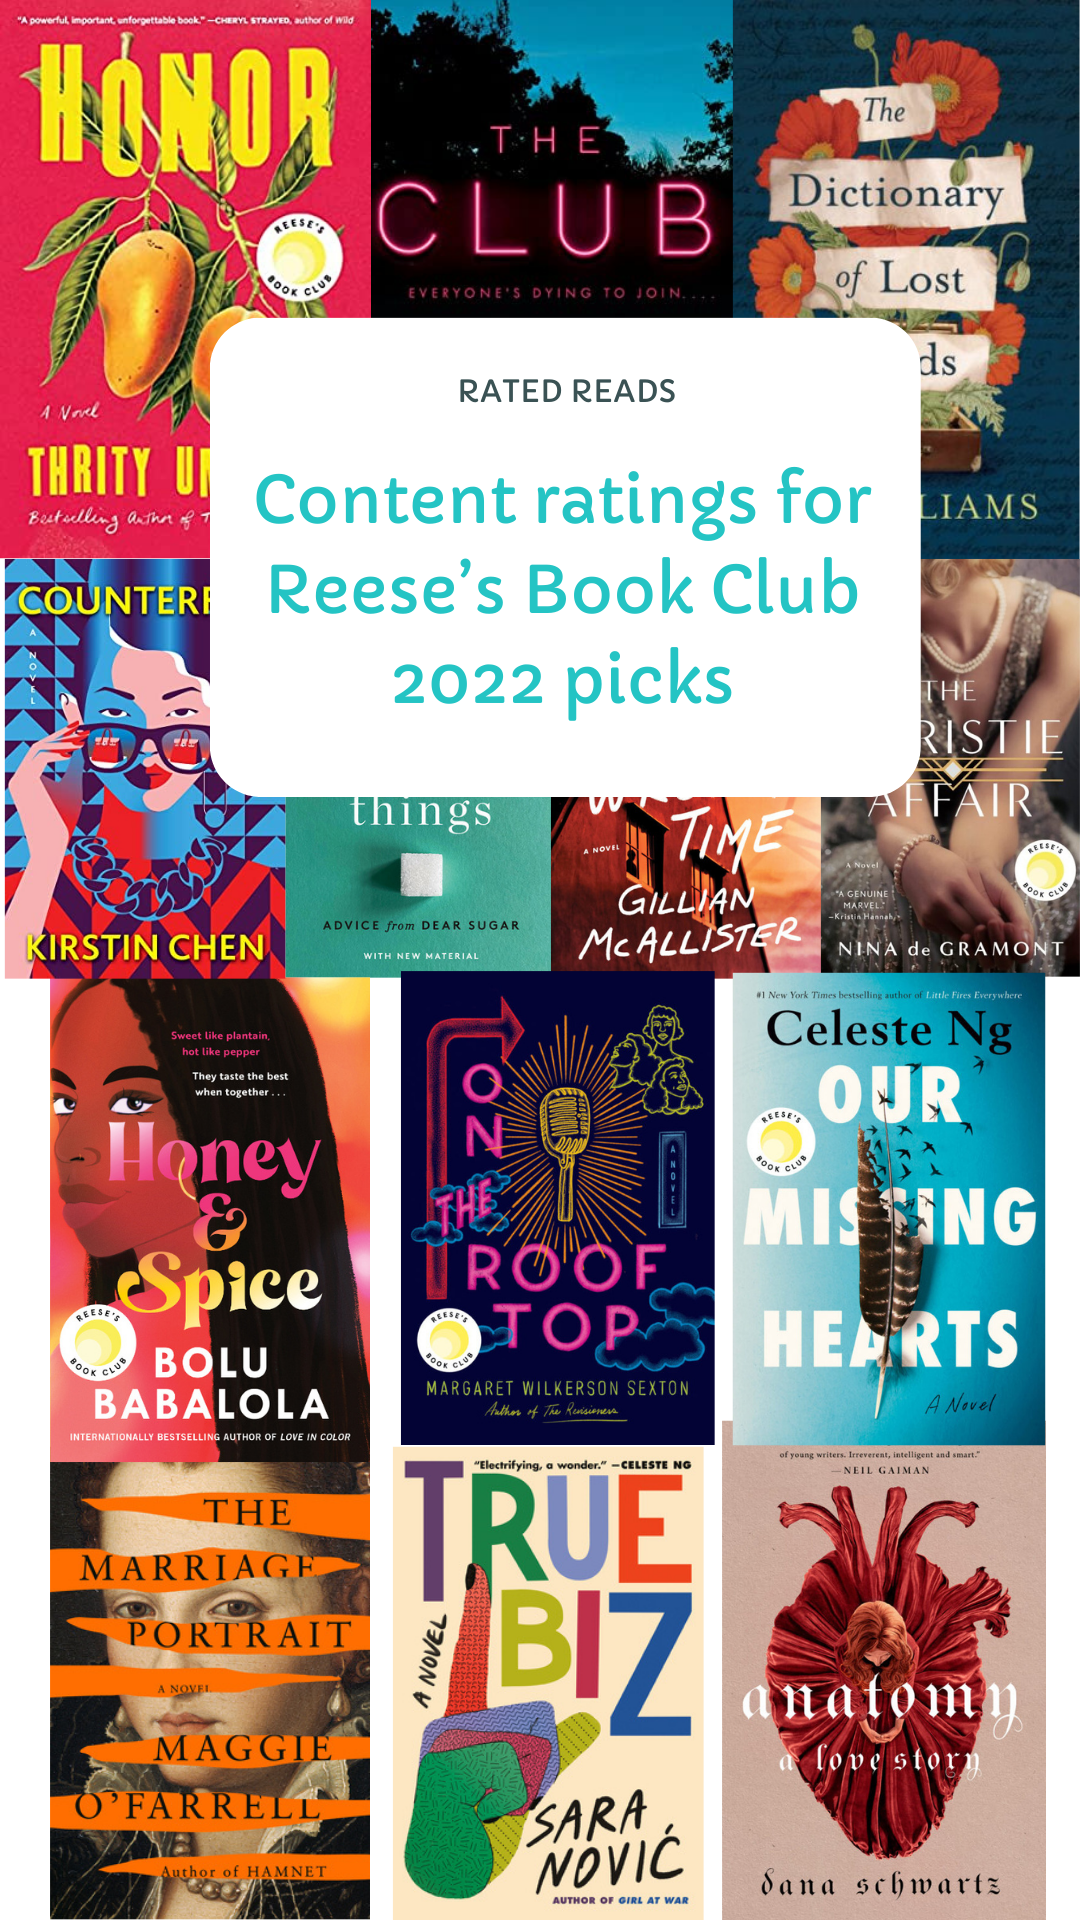 Reese's Book Club picks from 2022 with content ratings